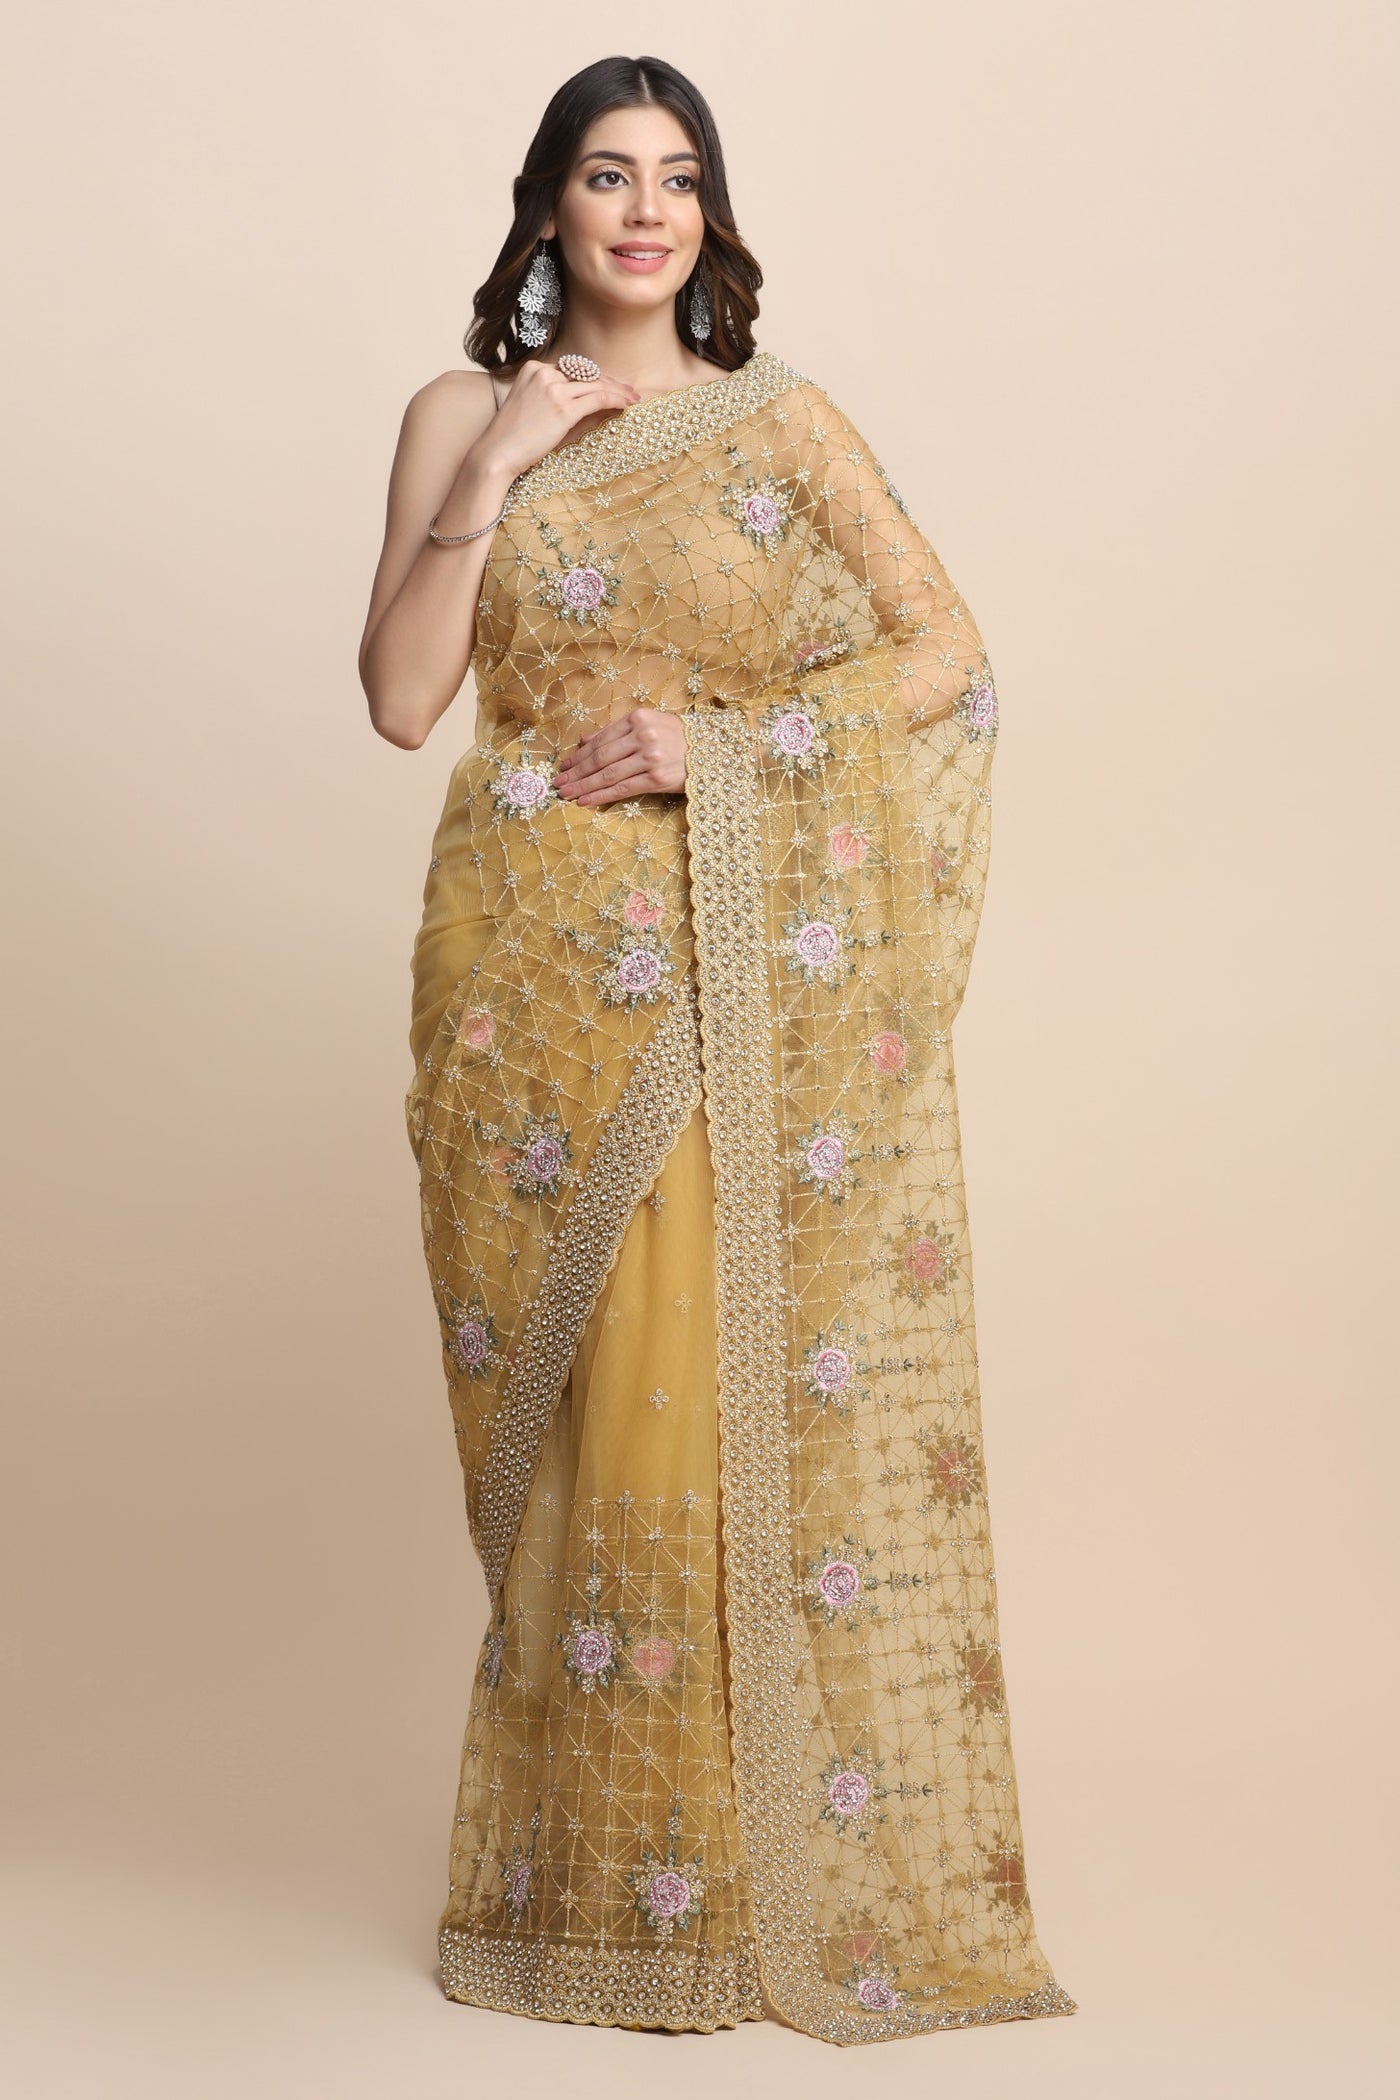 Gorgeous yellow color floral jaal embroidered saree